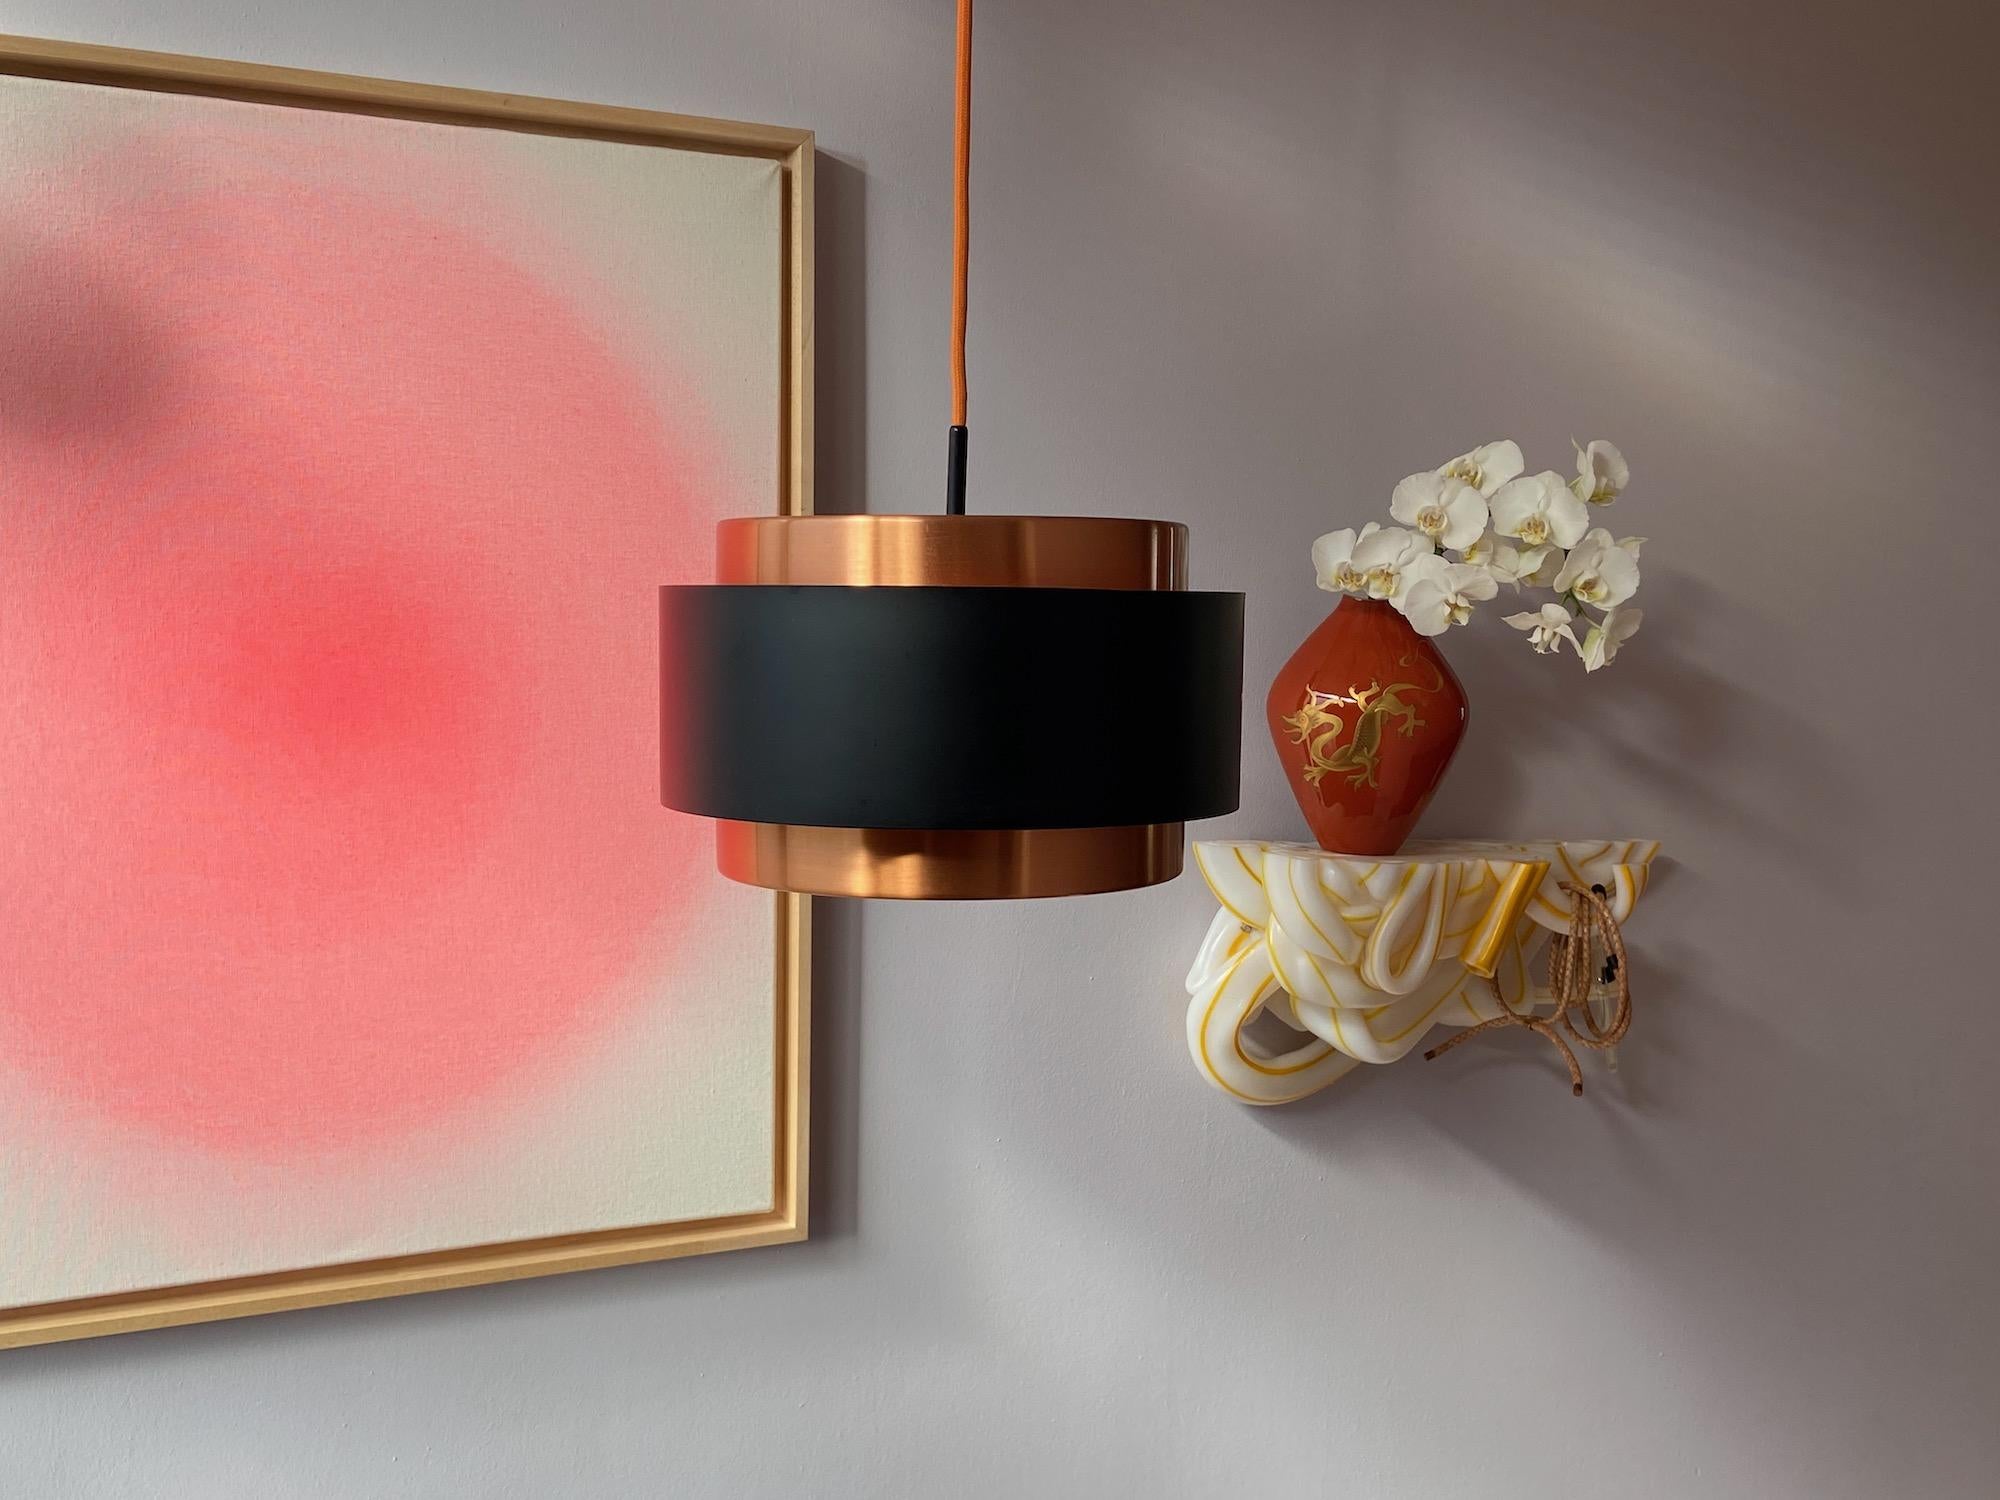 Jo Hammerborg Saturn pendant lamp for Fog & Mørup.
Copper metal, with black colored metal and acrylic top and button plate. New orange fabric cord. With 1x E26/27 Edision screw socket ready to use. Good condition with nice patina and perfect